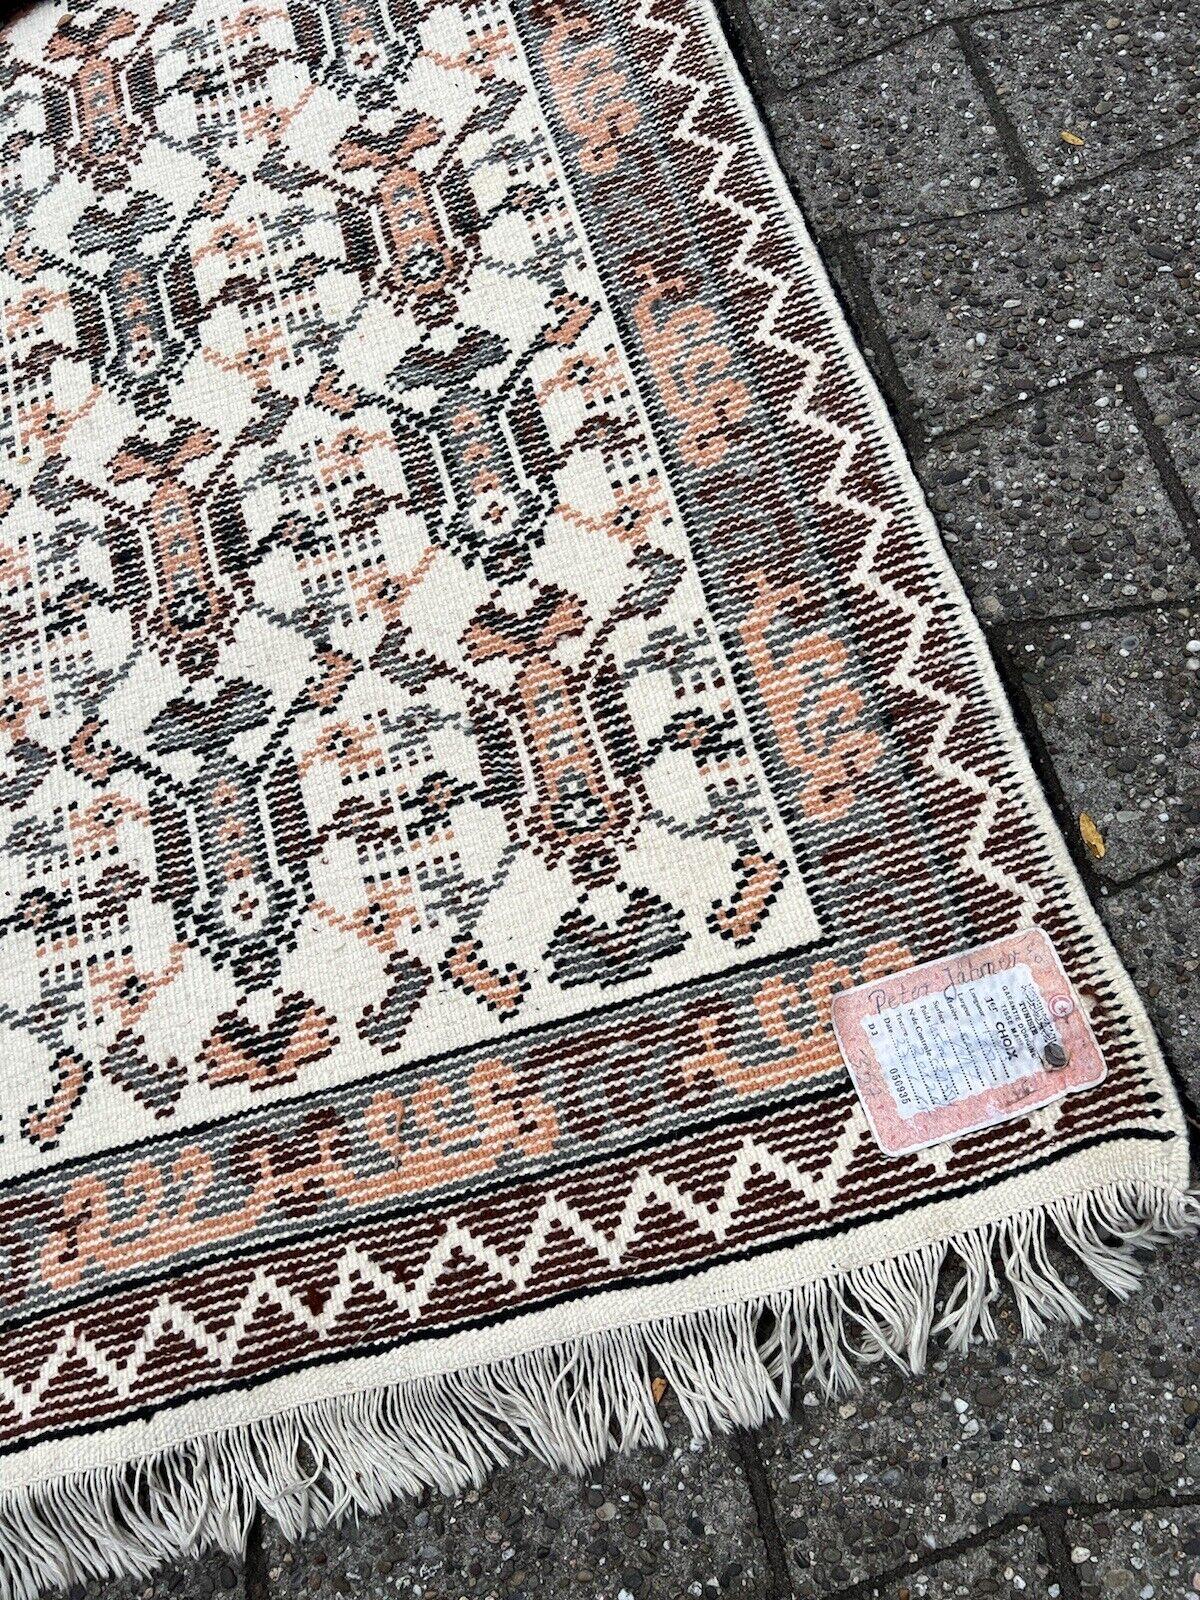 Handmade Vintage Tunisian Berber Rug 2.7' x 4.9', 1970s - 1S53 In Good Condition For Sale In Bordeaux, FR